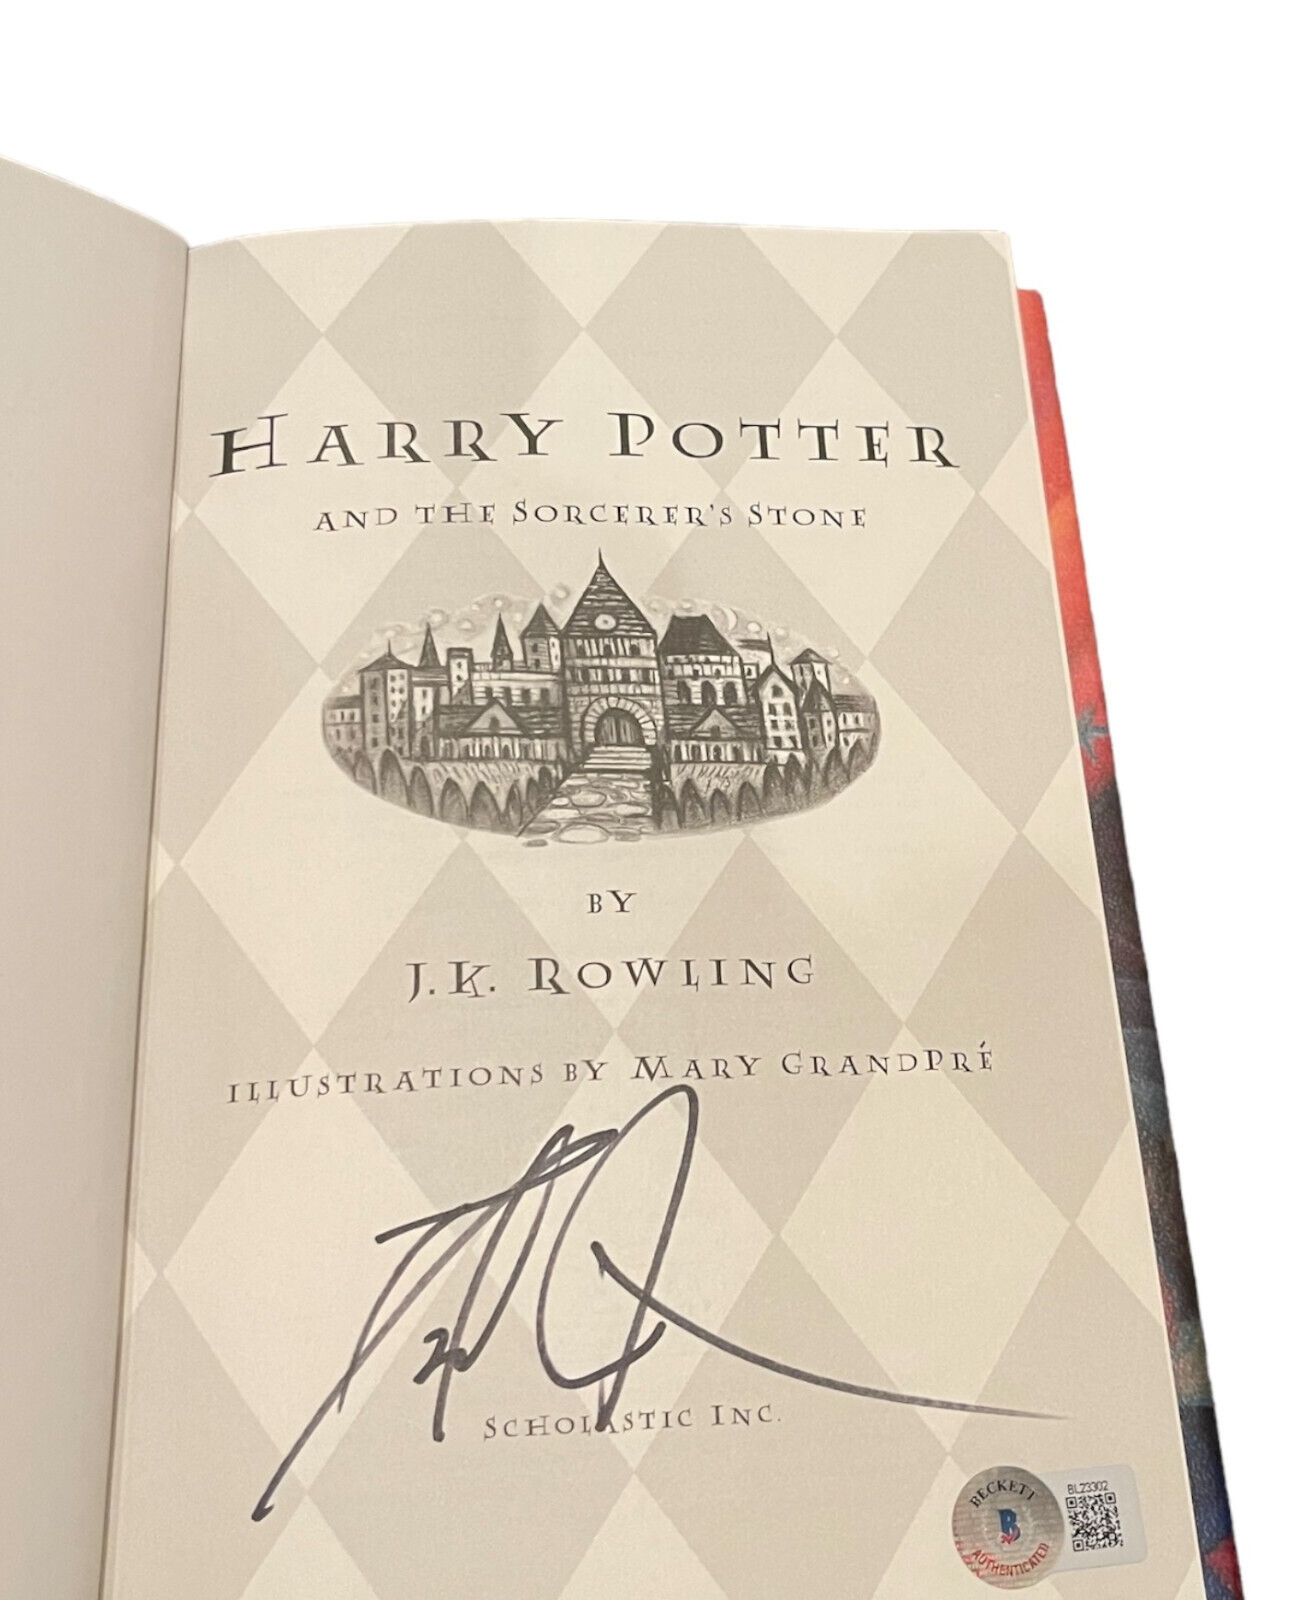 Daniel Radcliffe Signed Auto Harry Potter And The Sorcerer\'s Stone Book BAS